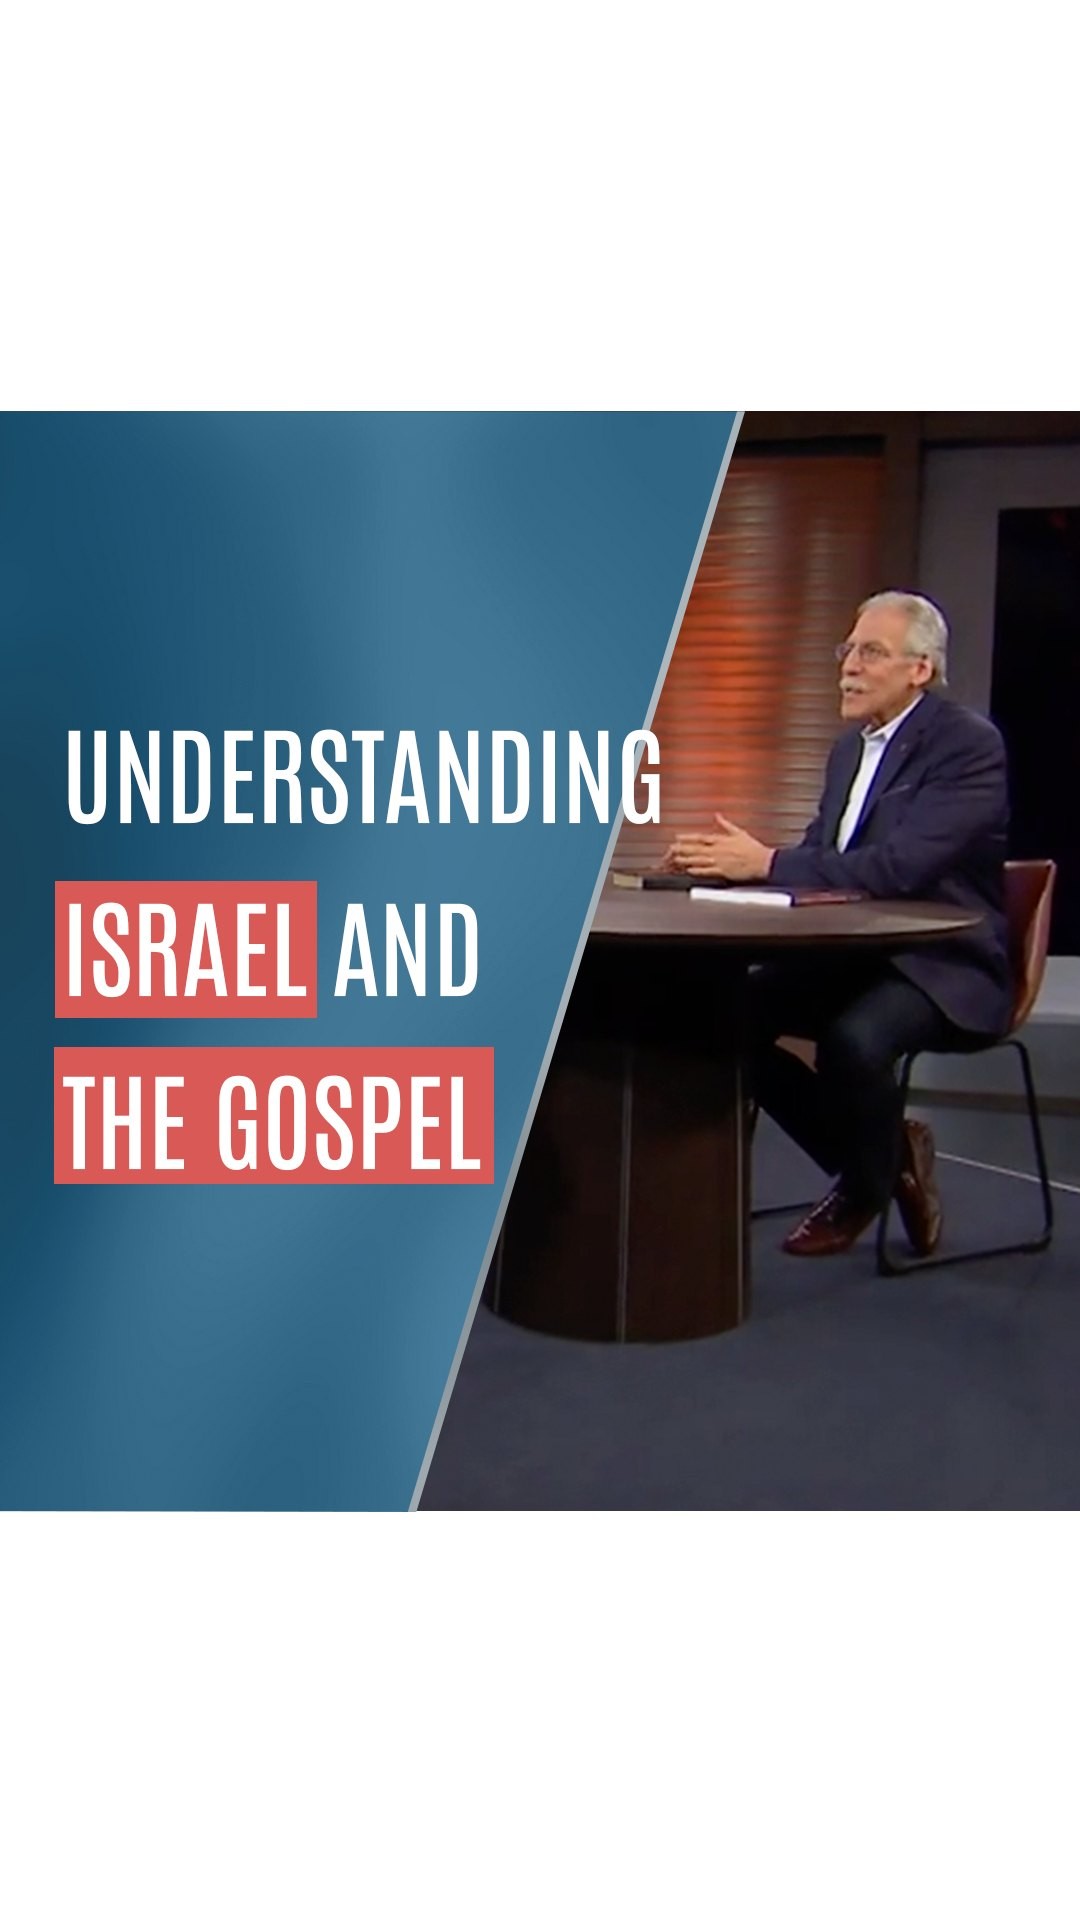 “If you don’t understand Israel, you don’t understand Paul’s Gospel.” So argues Dr. Bob Gladstone in the latest episode of the Ways of the Kingdom Series, Understanding God’s Heart for Israel, where he and Dr. Brown the different questions believers have surrounding this topic.LINK TO FULL EPISODE IN BIO#askdrbrown #drmichaelbrown #israel #israel2022 #thegospel